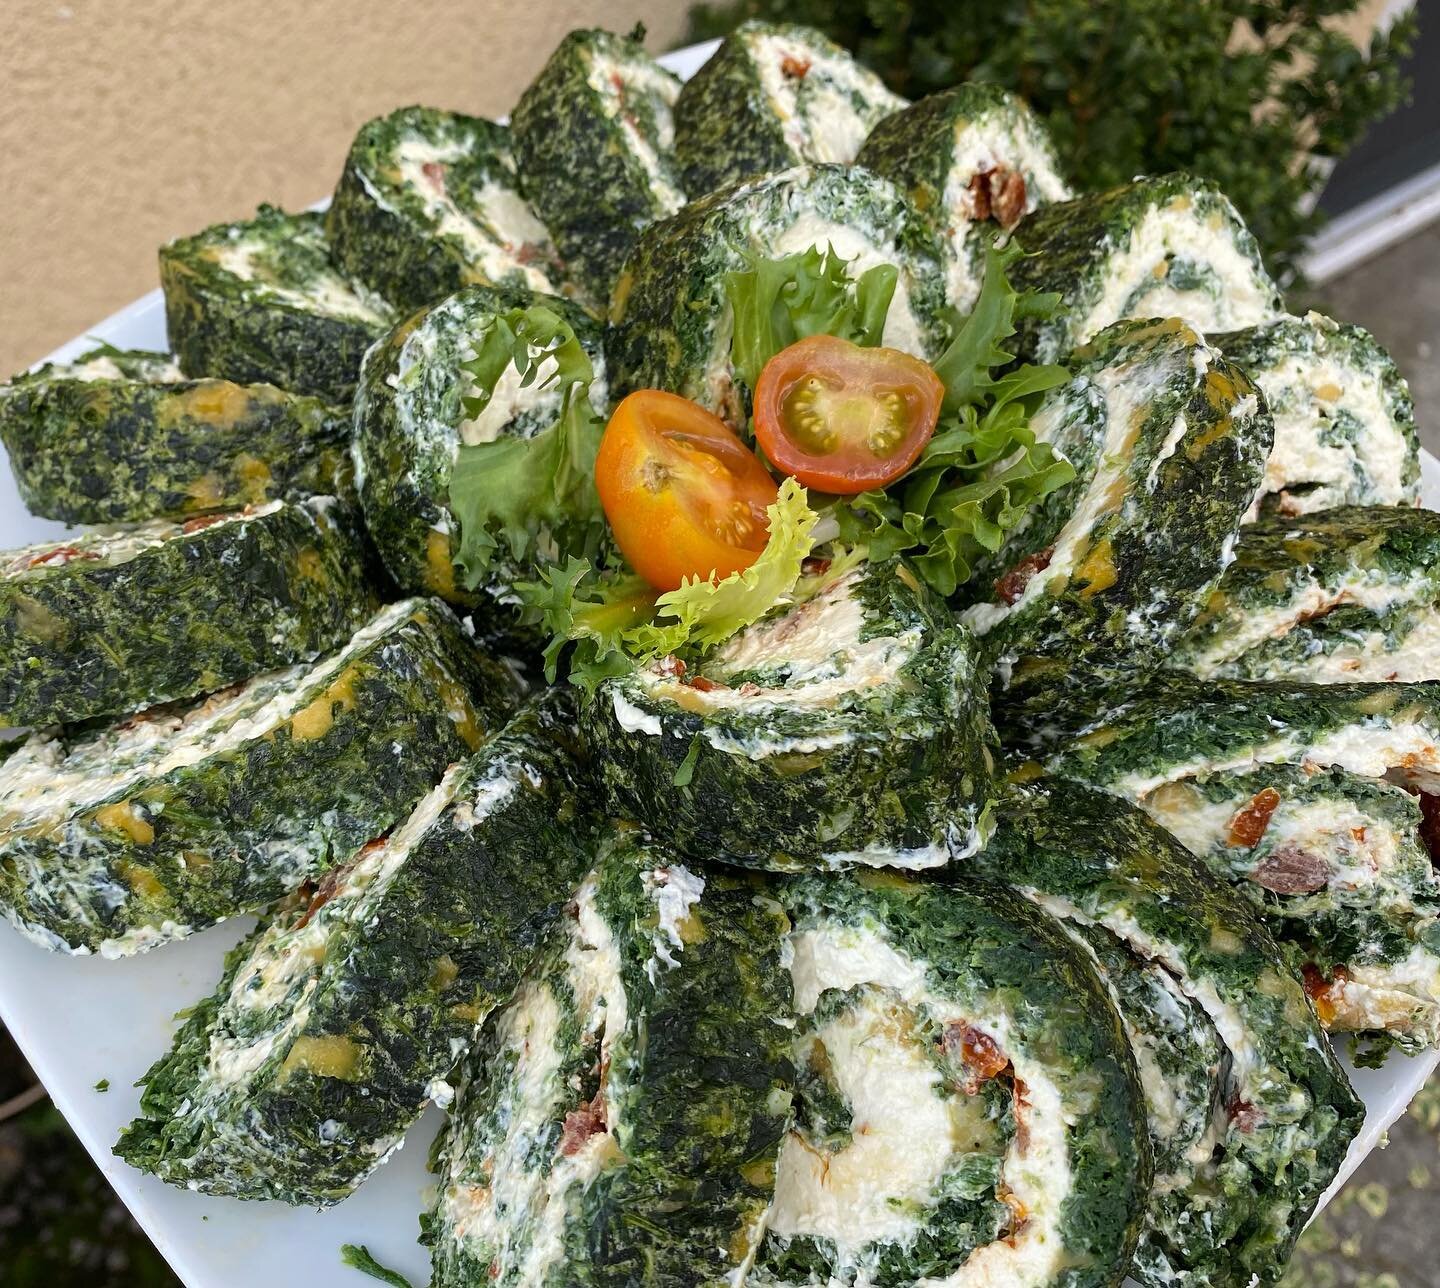 Spinach roulade with roasted local grown (Eckington) cherry tomatoes.

#caterer #localfood #partyfood